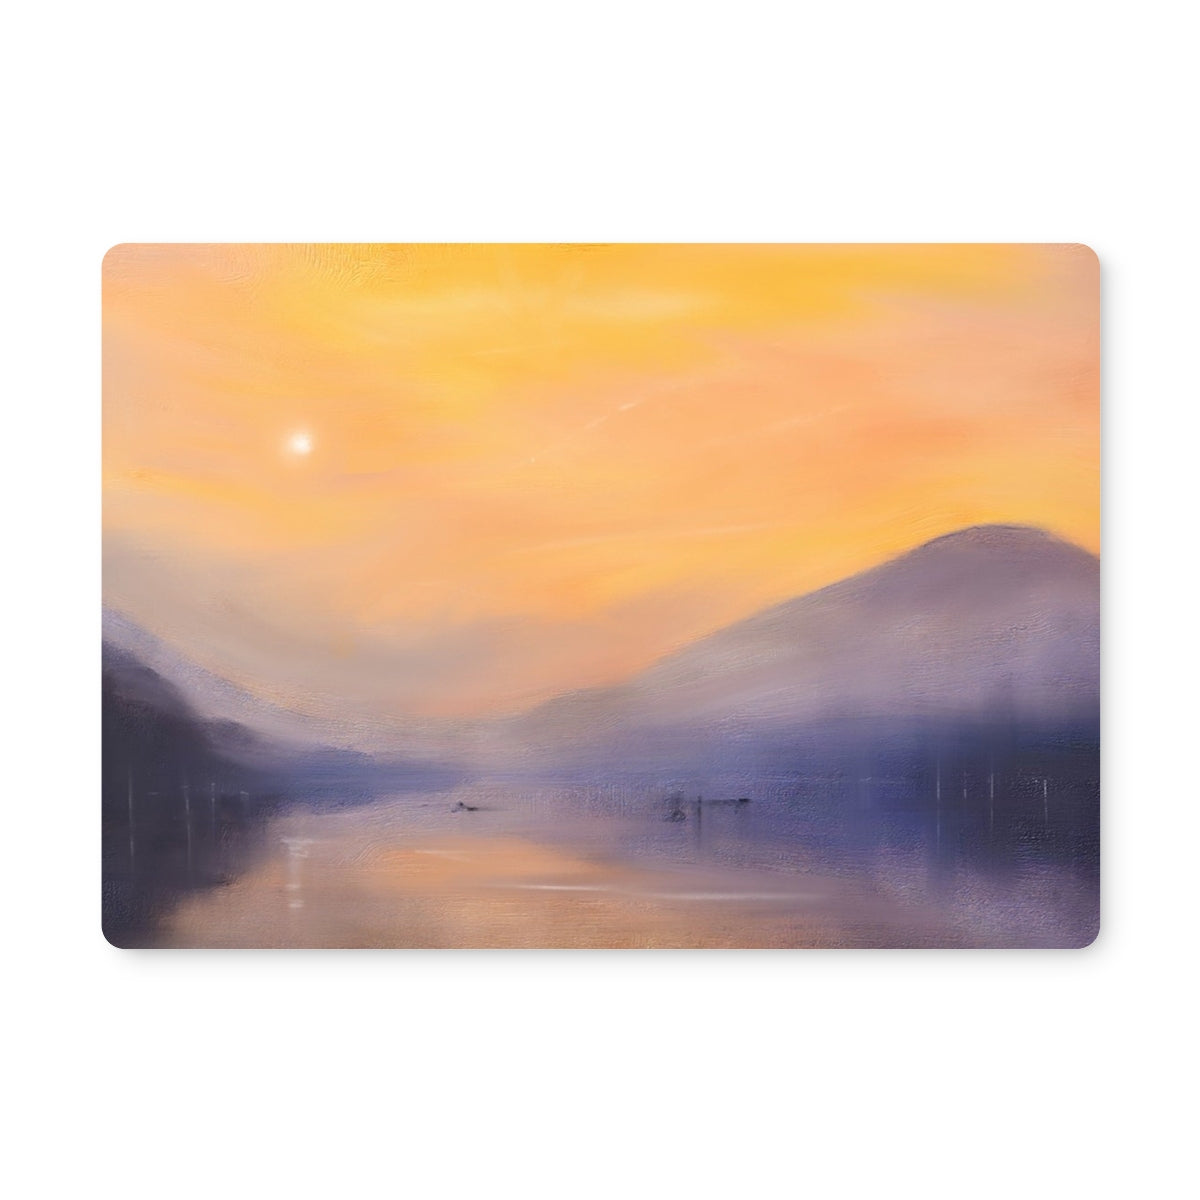 Loch Eck Dusk Art Gifts Placemat-Placemats-Scottish Lochs & Mountains Art Gallery-2 Placemats-Paintings, Prints, Homeware, Art Gifts From Scotland By Scottish Artist Kevin Hunter